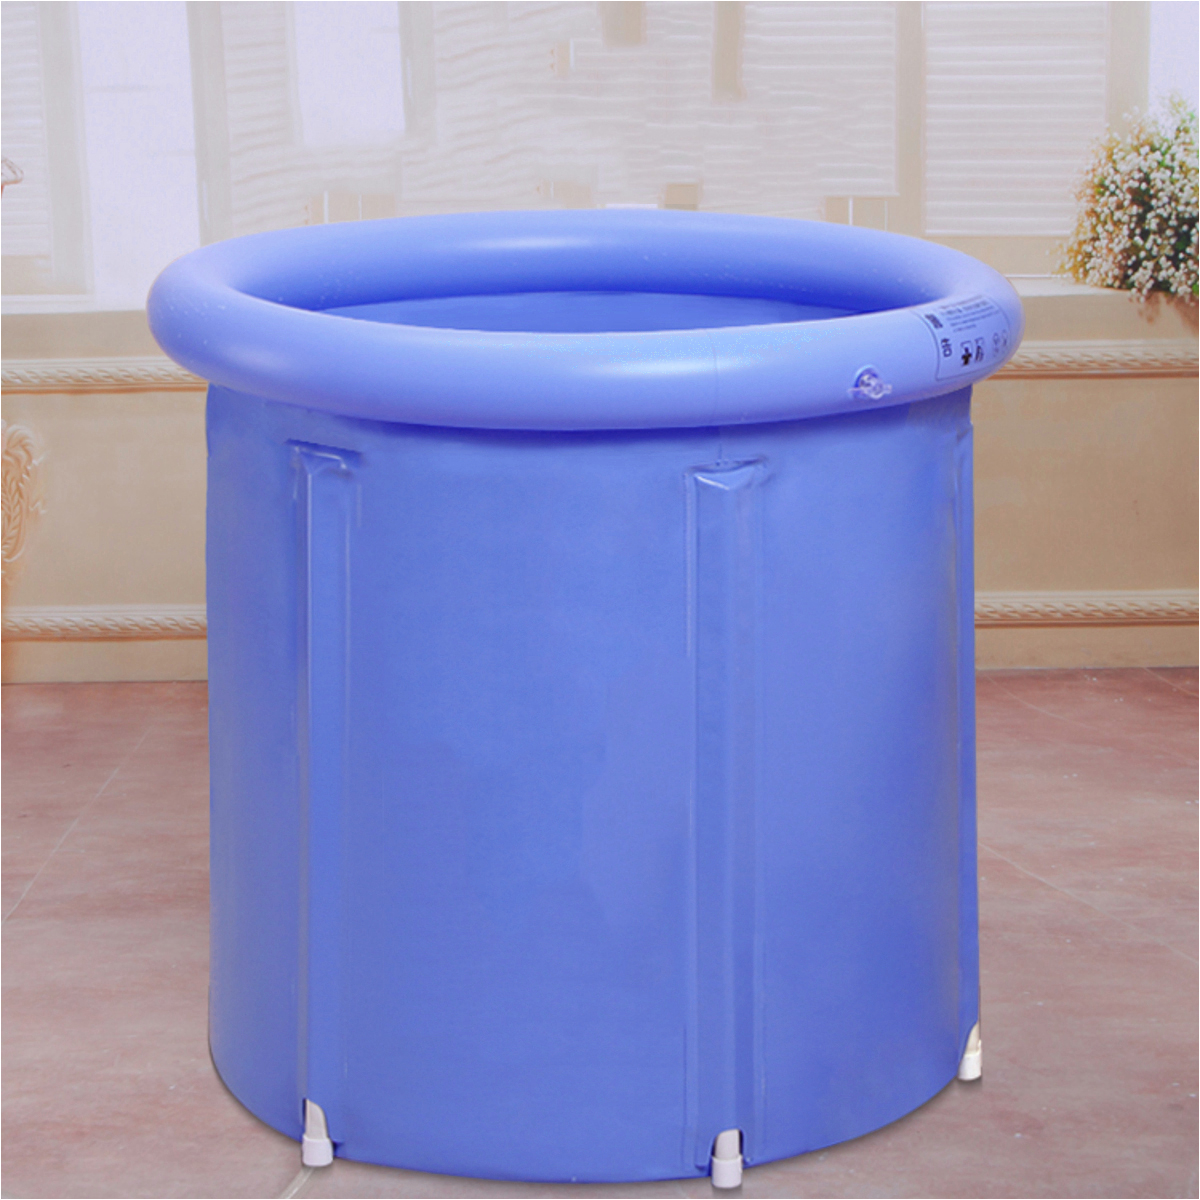 Portable Bathtub for Adults Uk 70cm Inflatable Bathtub Adult Portable Folding Spa Bathing